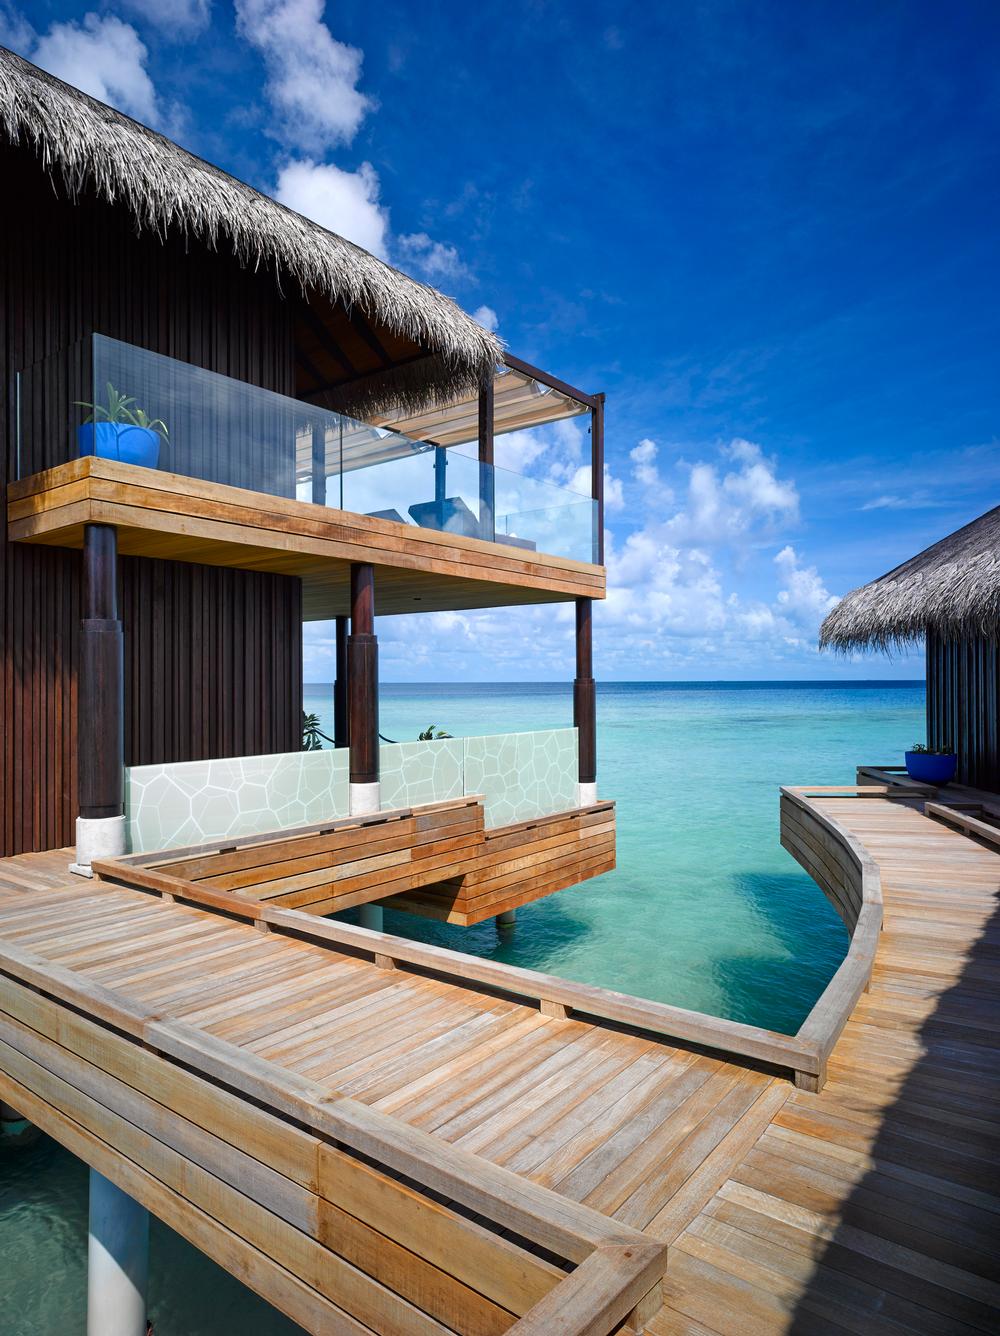 The over-water spa is open the sky, with wooden walkways between treatment rooms